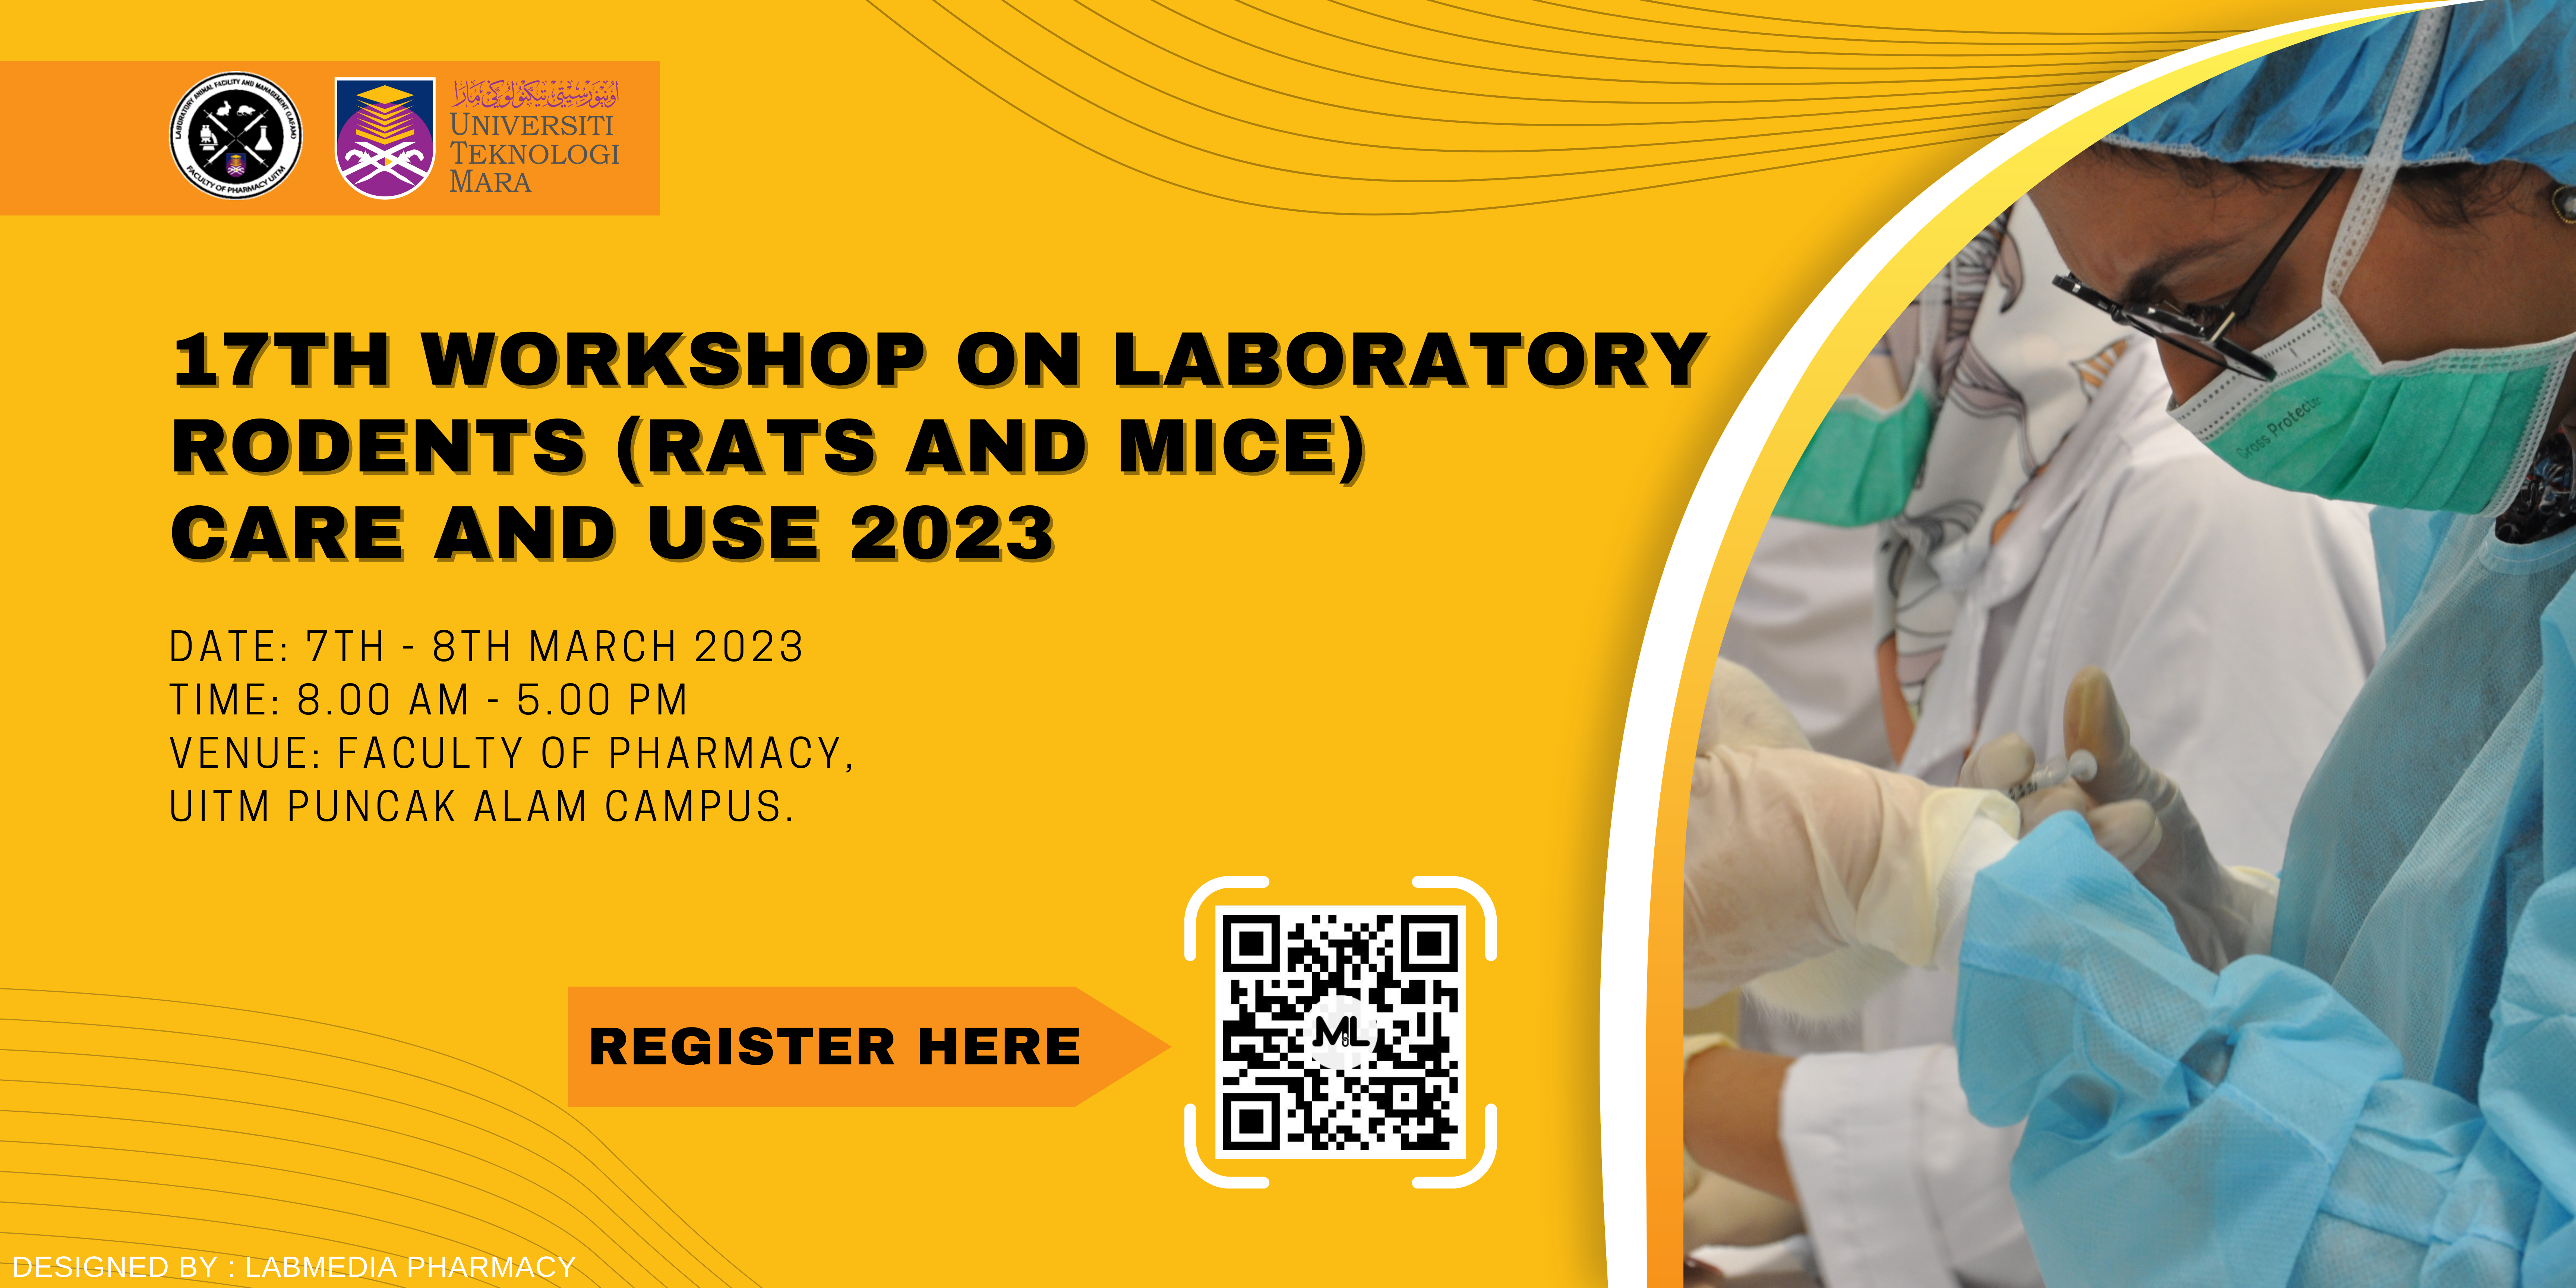 17th Workshop on Laboratory Rodents (Rats and Mice) Care and Use 2023